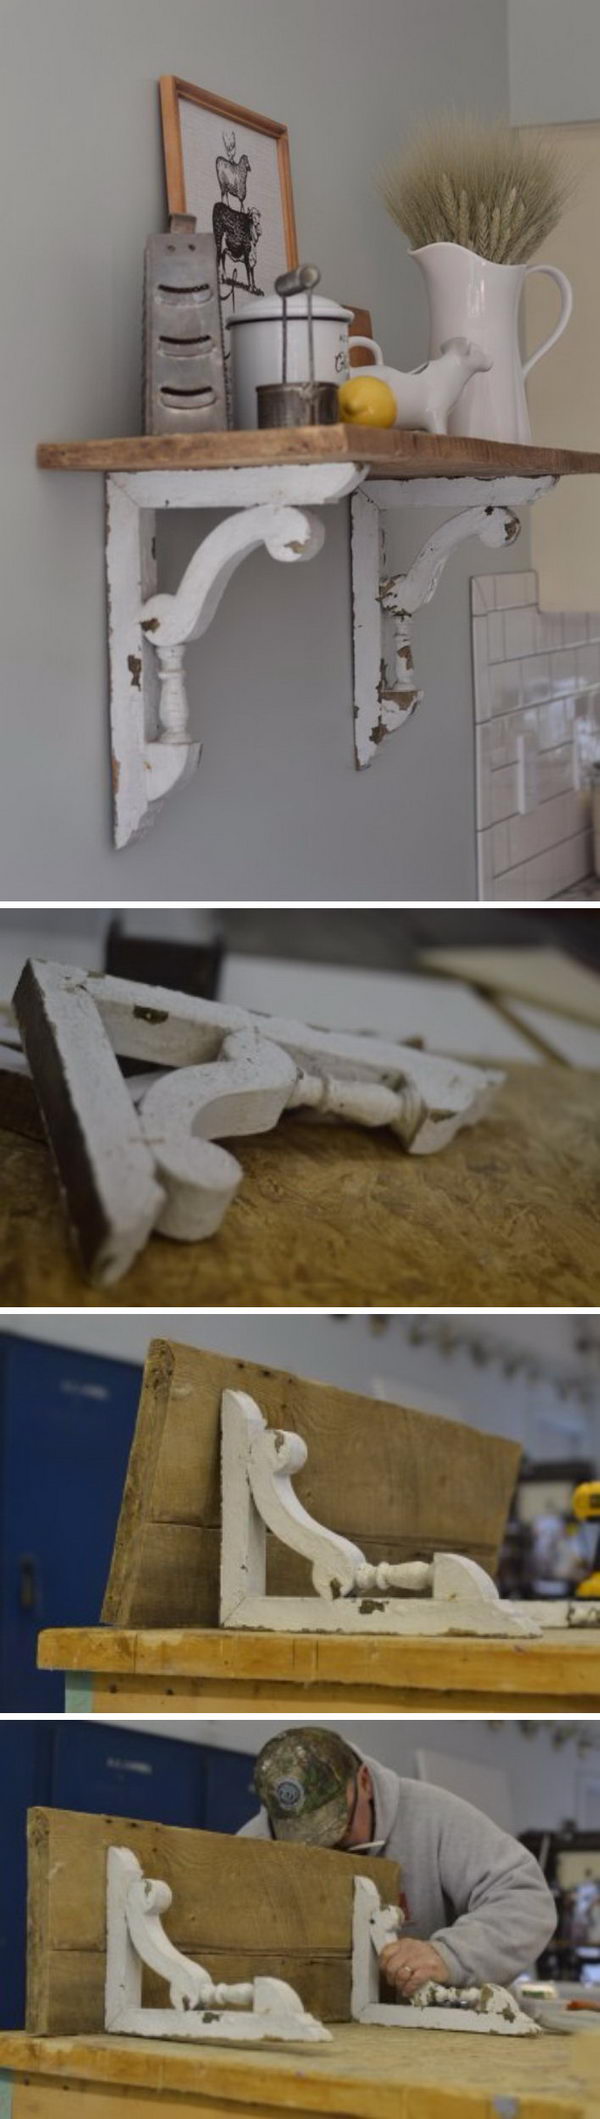 DIY Shelf Made From Old Barn-Wood And Beautiful Chippy White Corbels. 